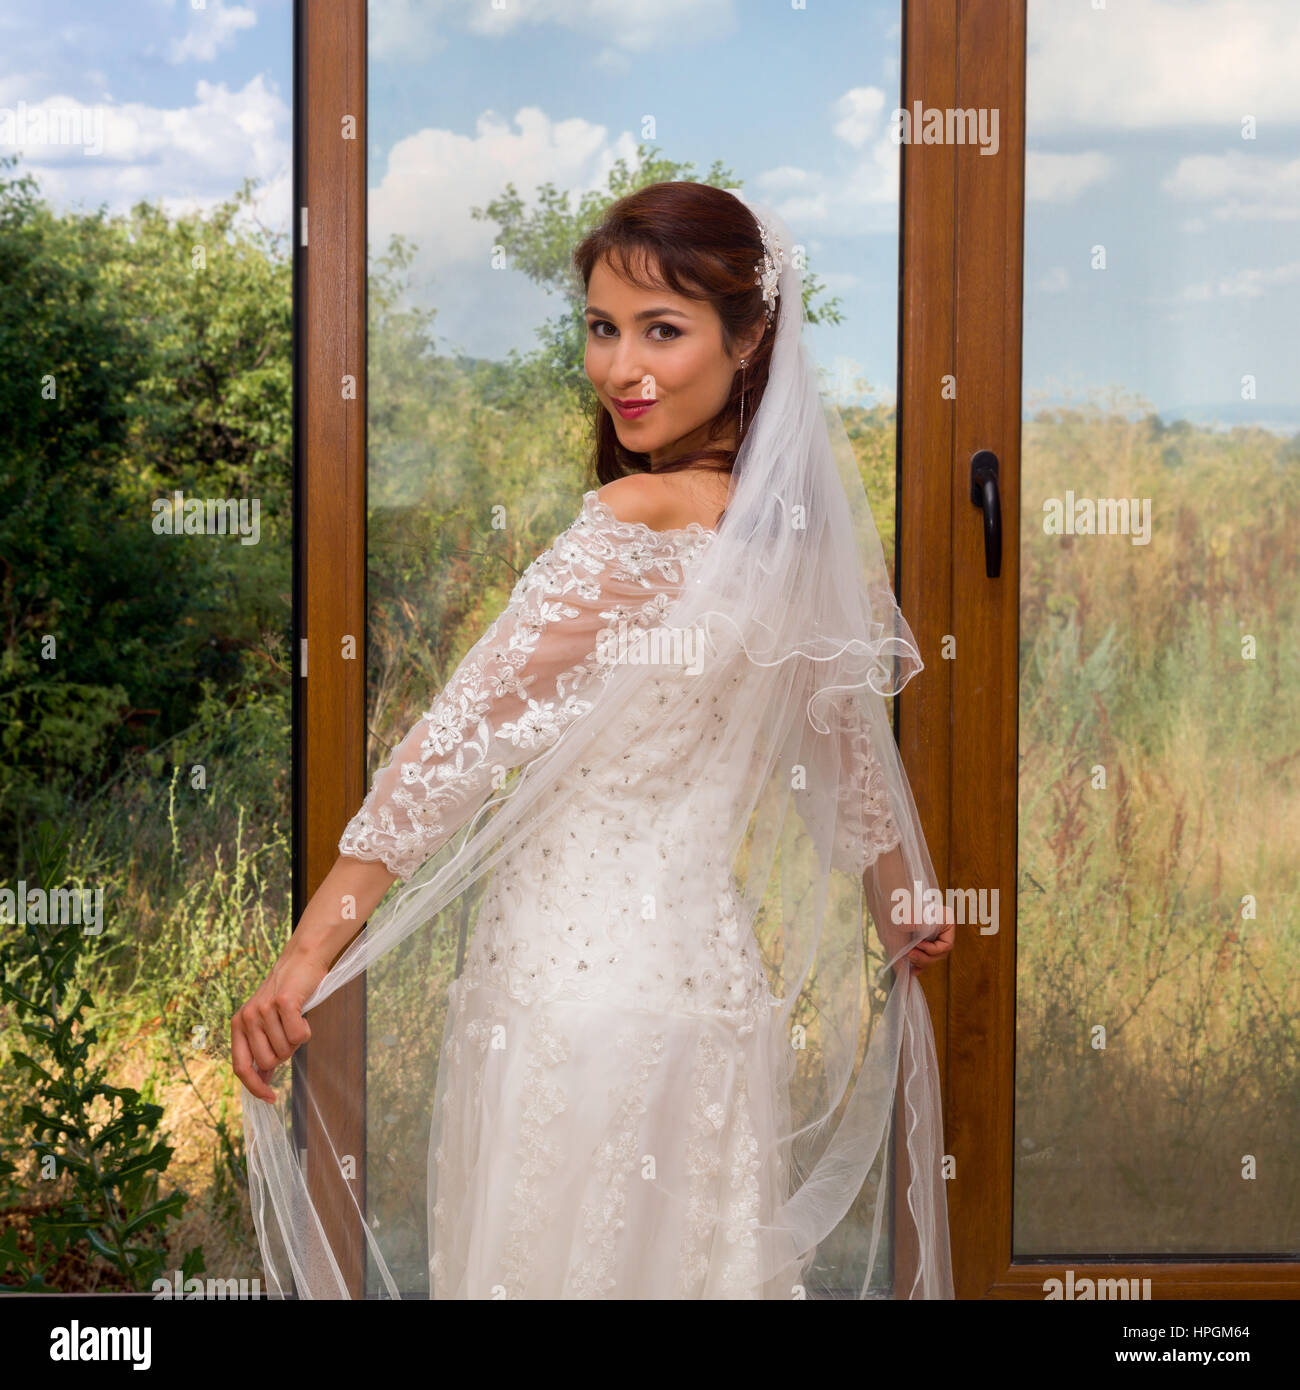 Young bride in traditional wedding dress standing in front of sliding doors or window Stock Photo